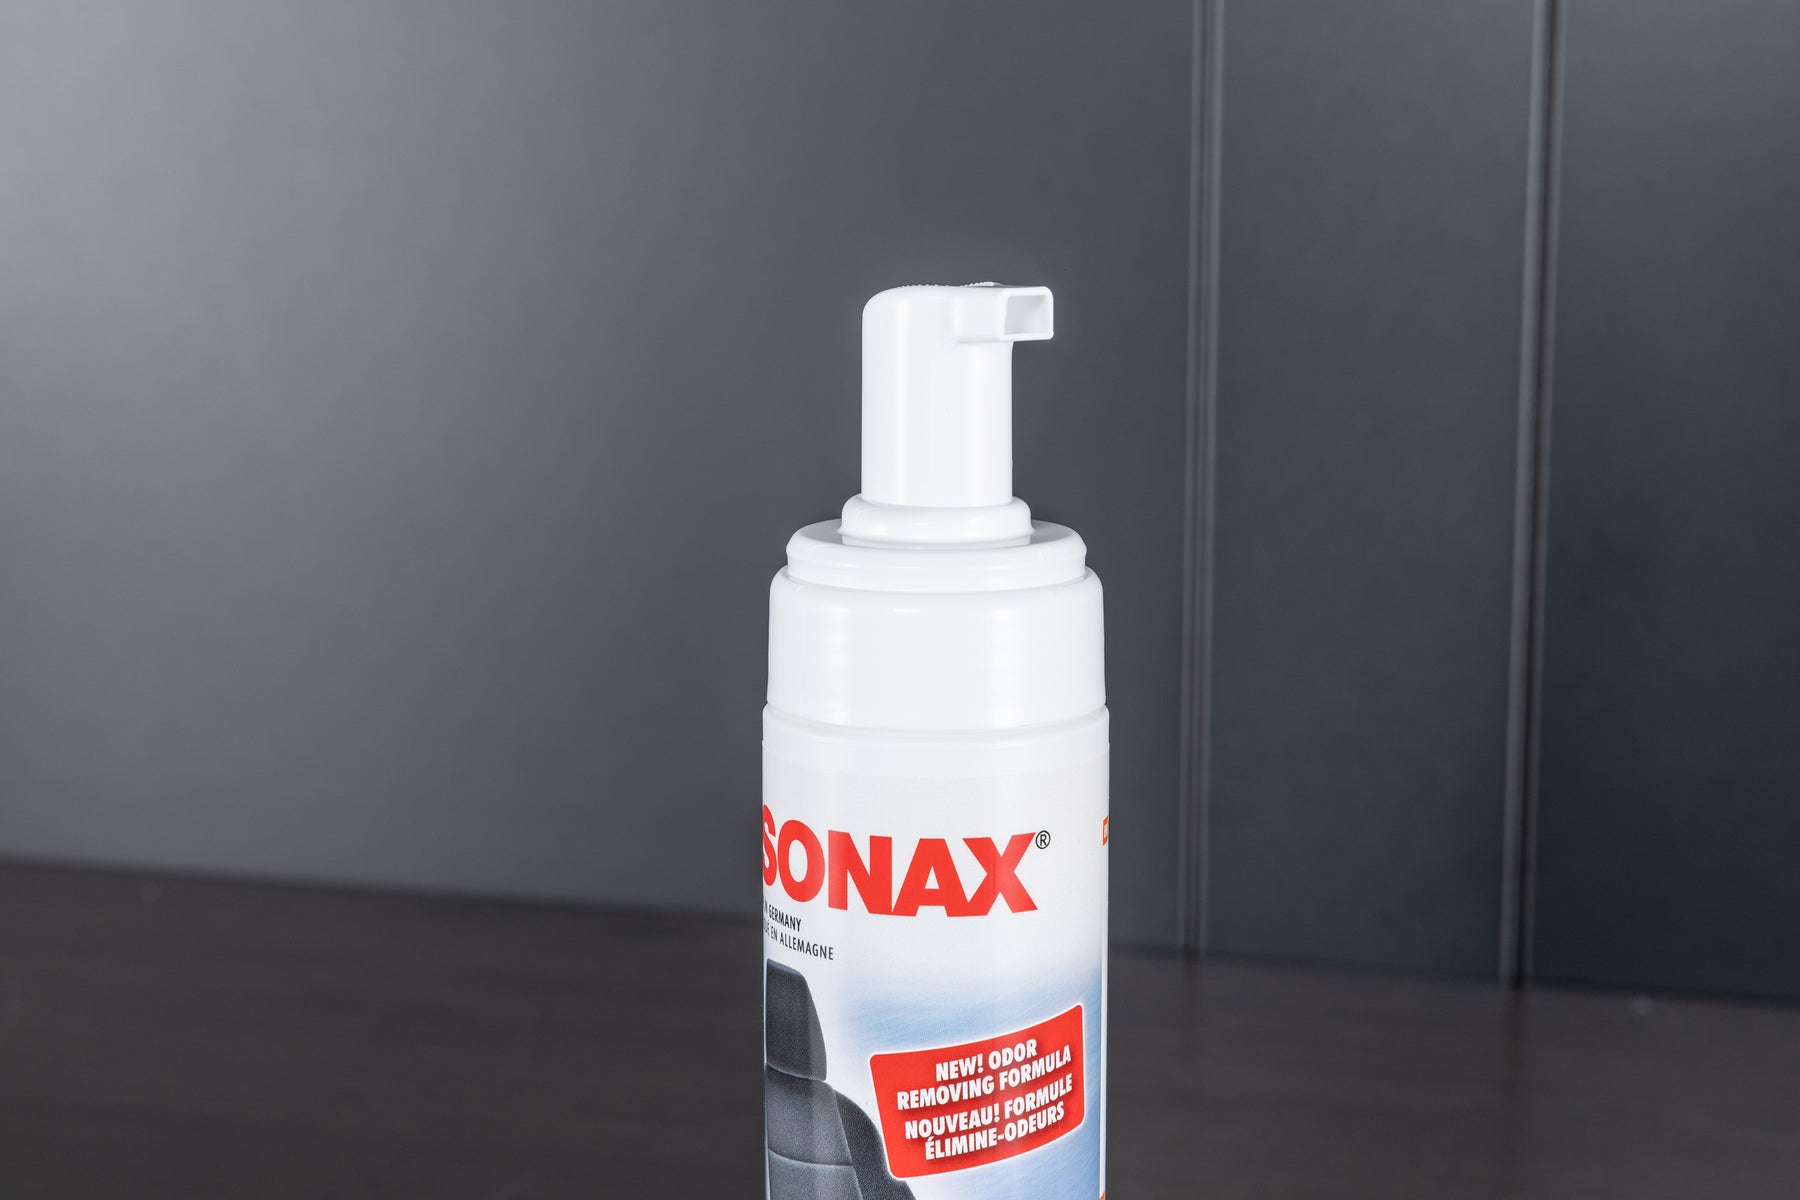 SONAX Car-Care Product SALES